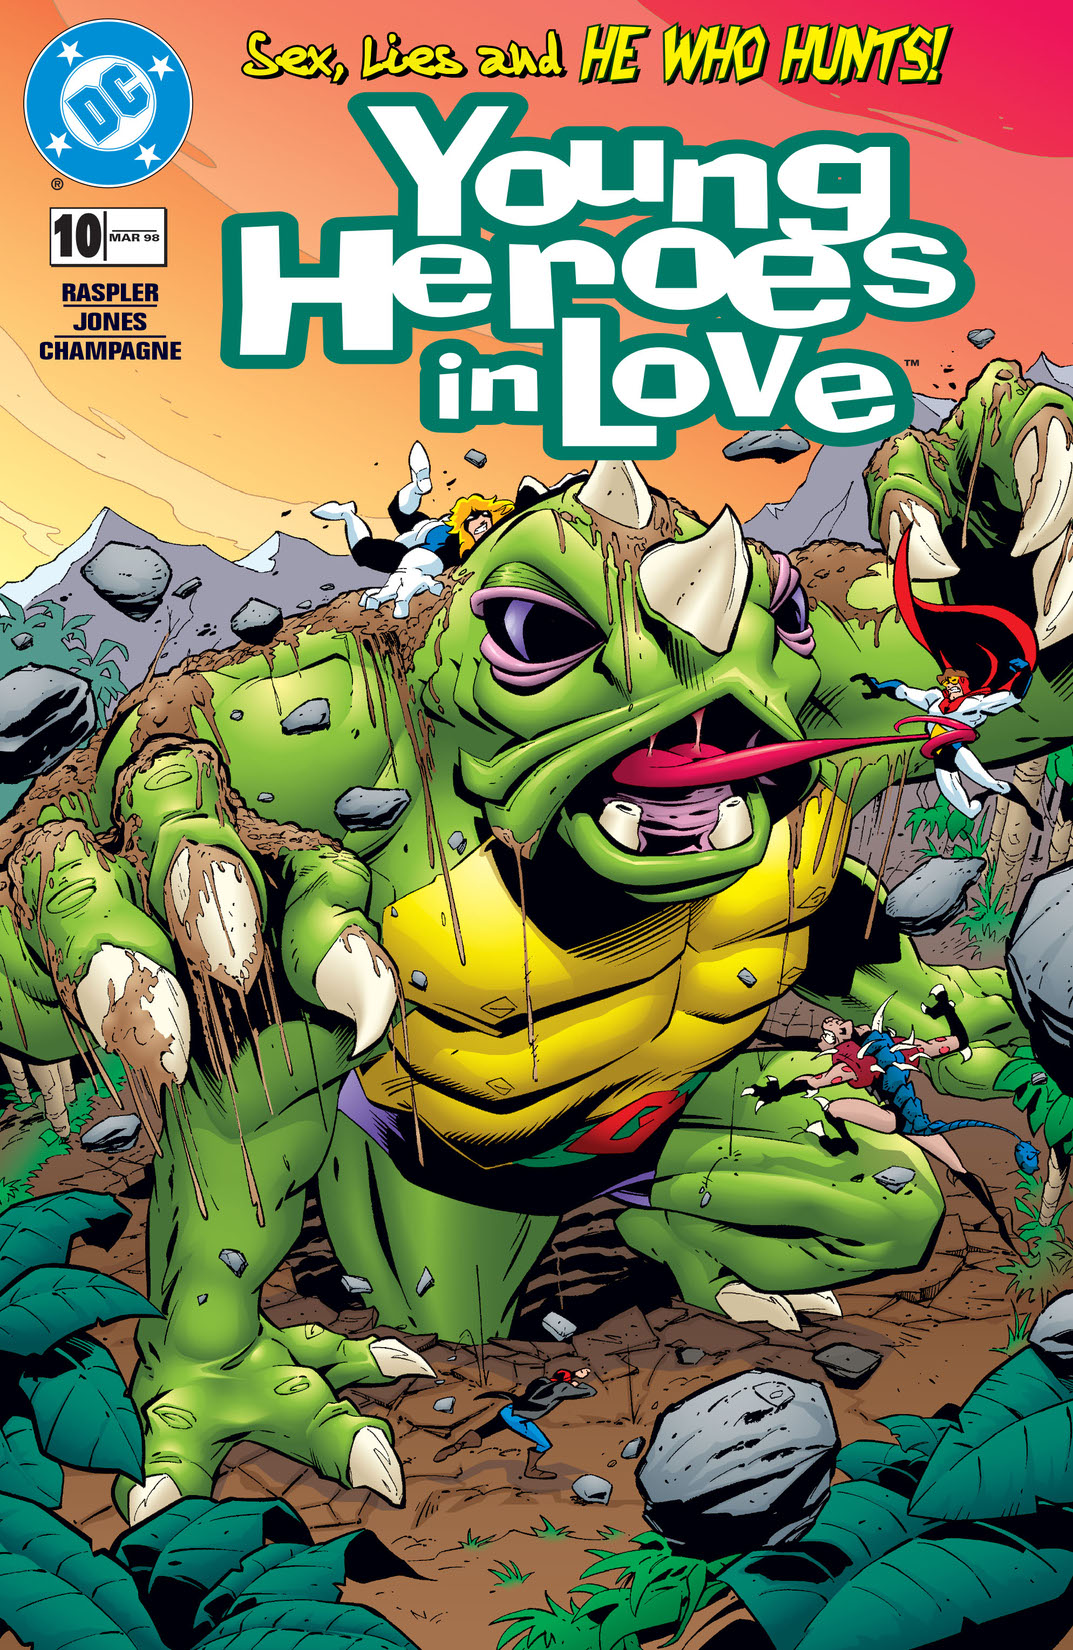 Young Heroes in Love #10 preview images